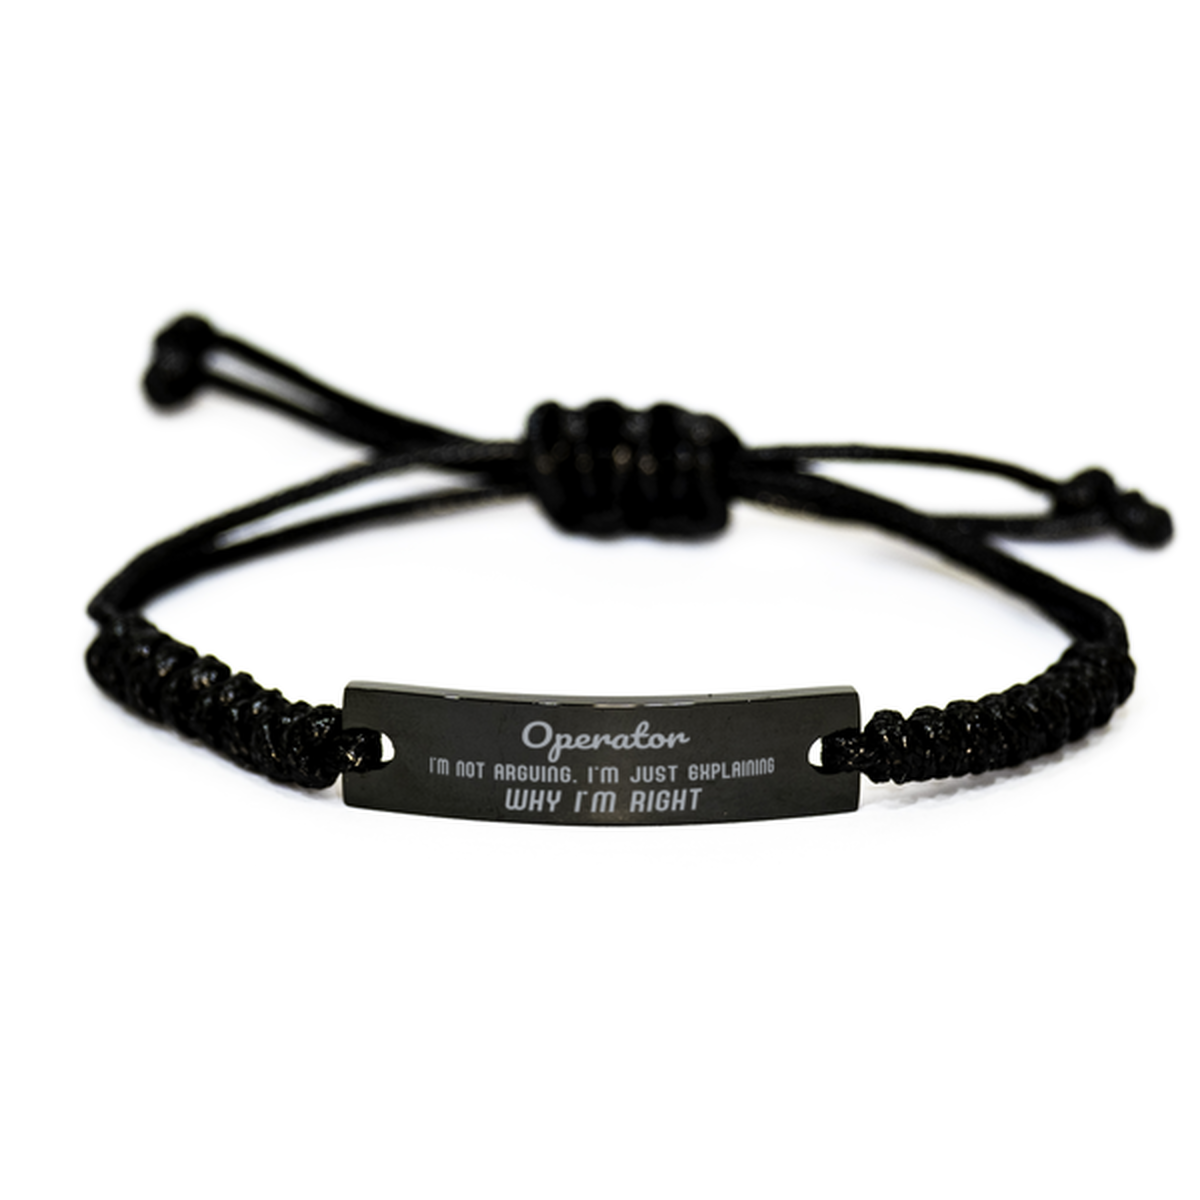 Operator I'm not Arguing. I'm Just Explaining Why I'm RIGHT Black Rope Bracelet, Funny Saying Quote Operator Gifts For Operator Graduation Birthday Christmas Gifts for Men Women Coworker